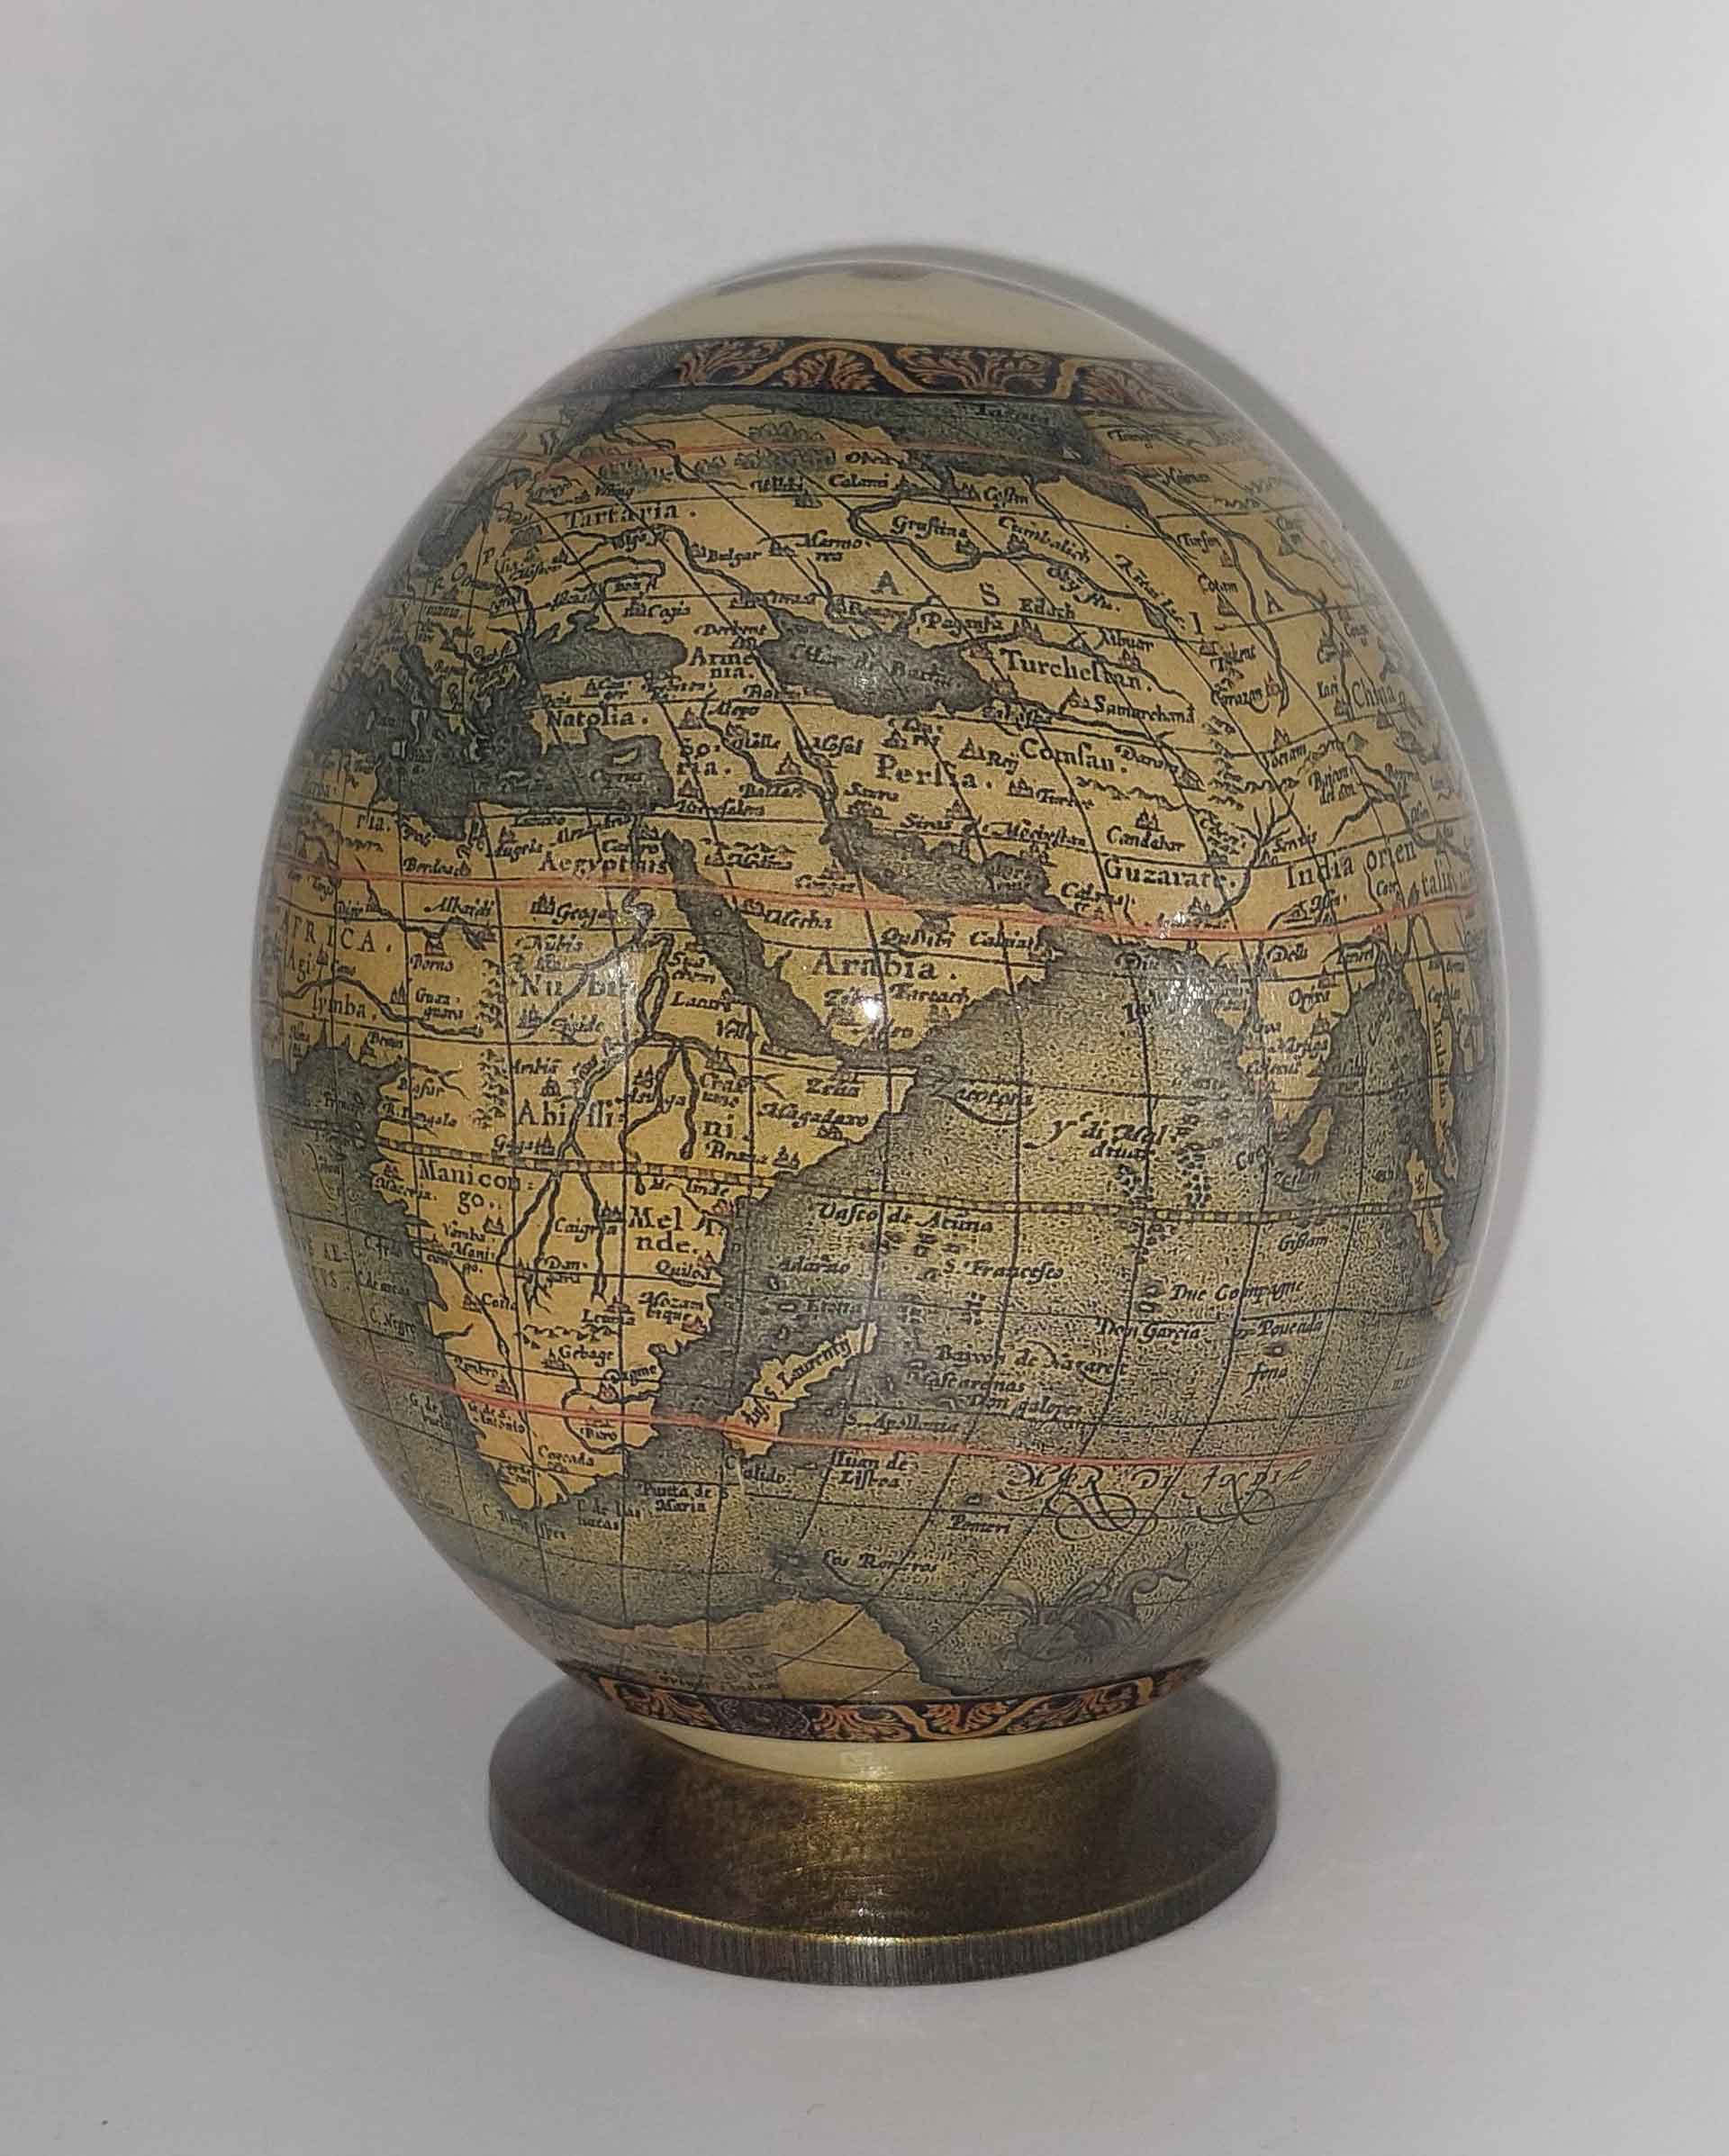 Oldest Globe of New World Carved on Ostrich Eggs?